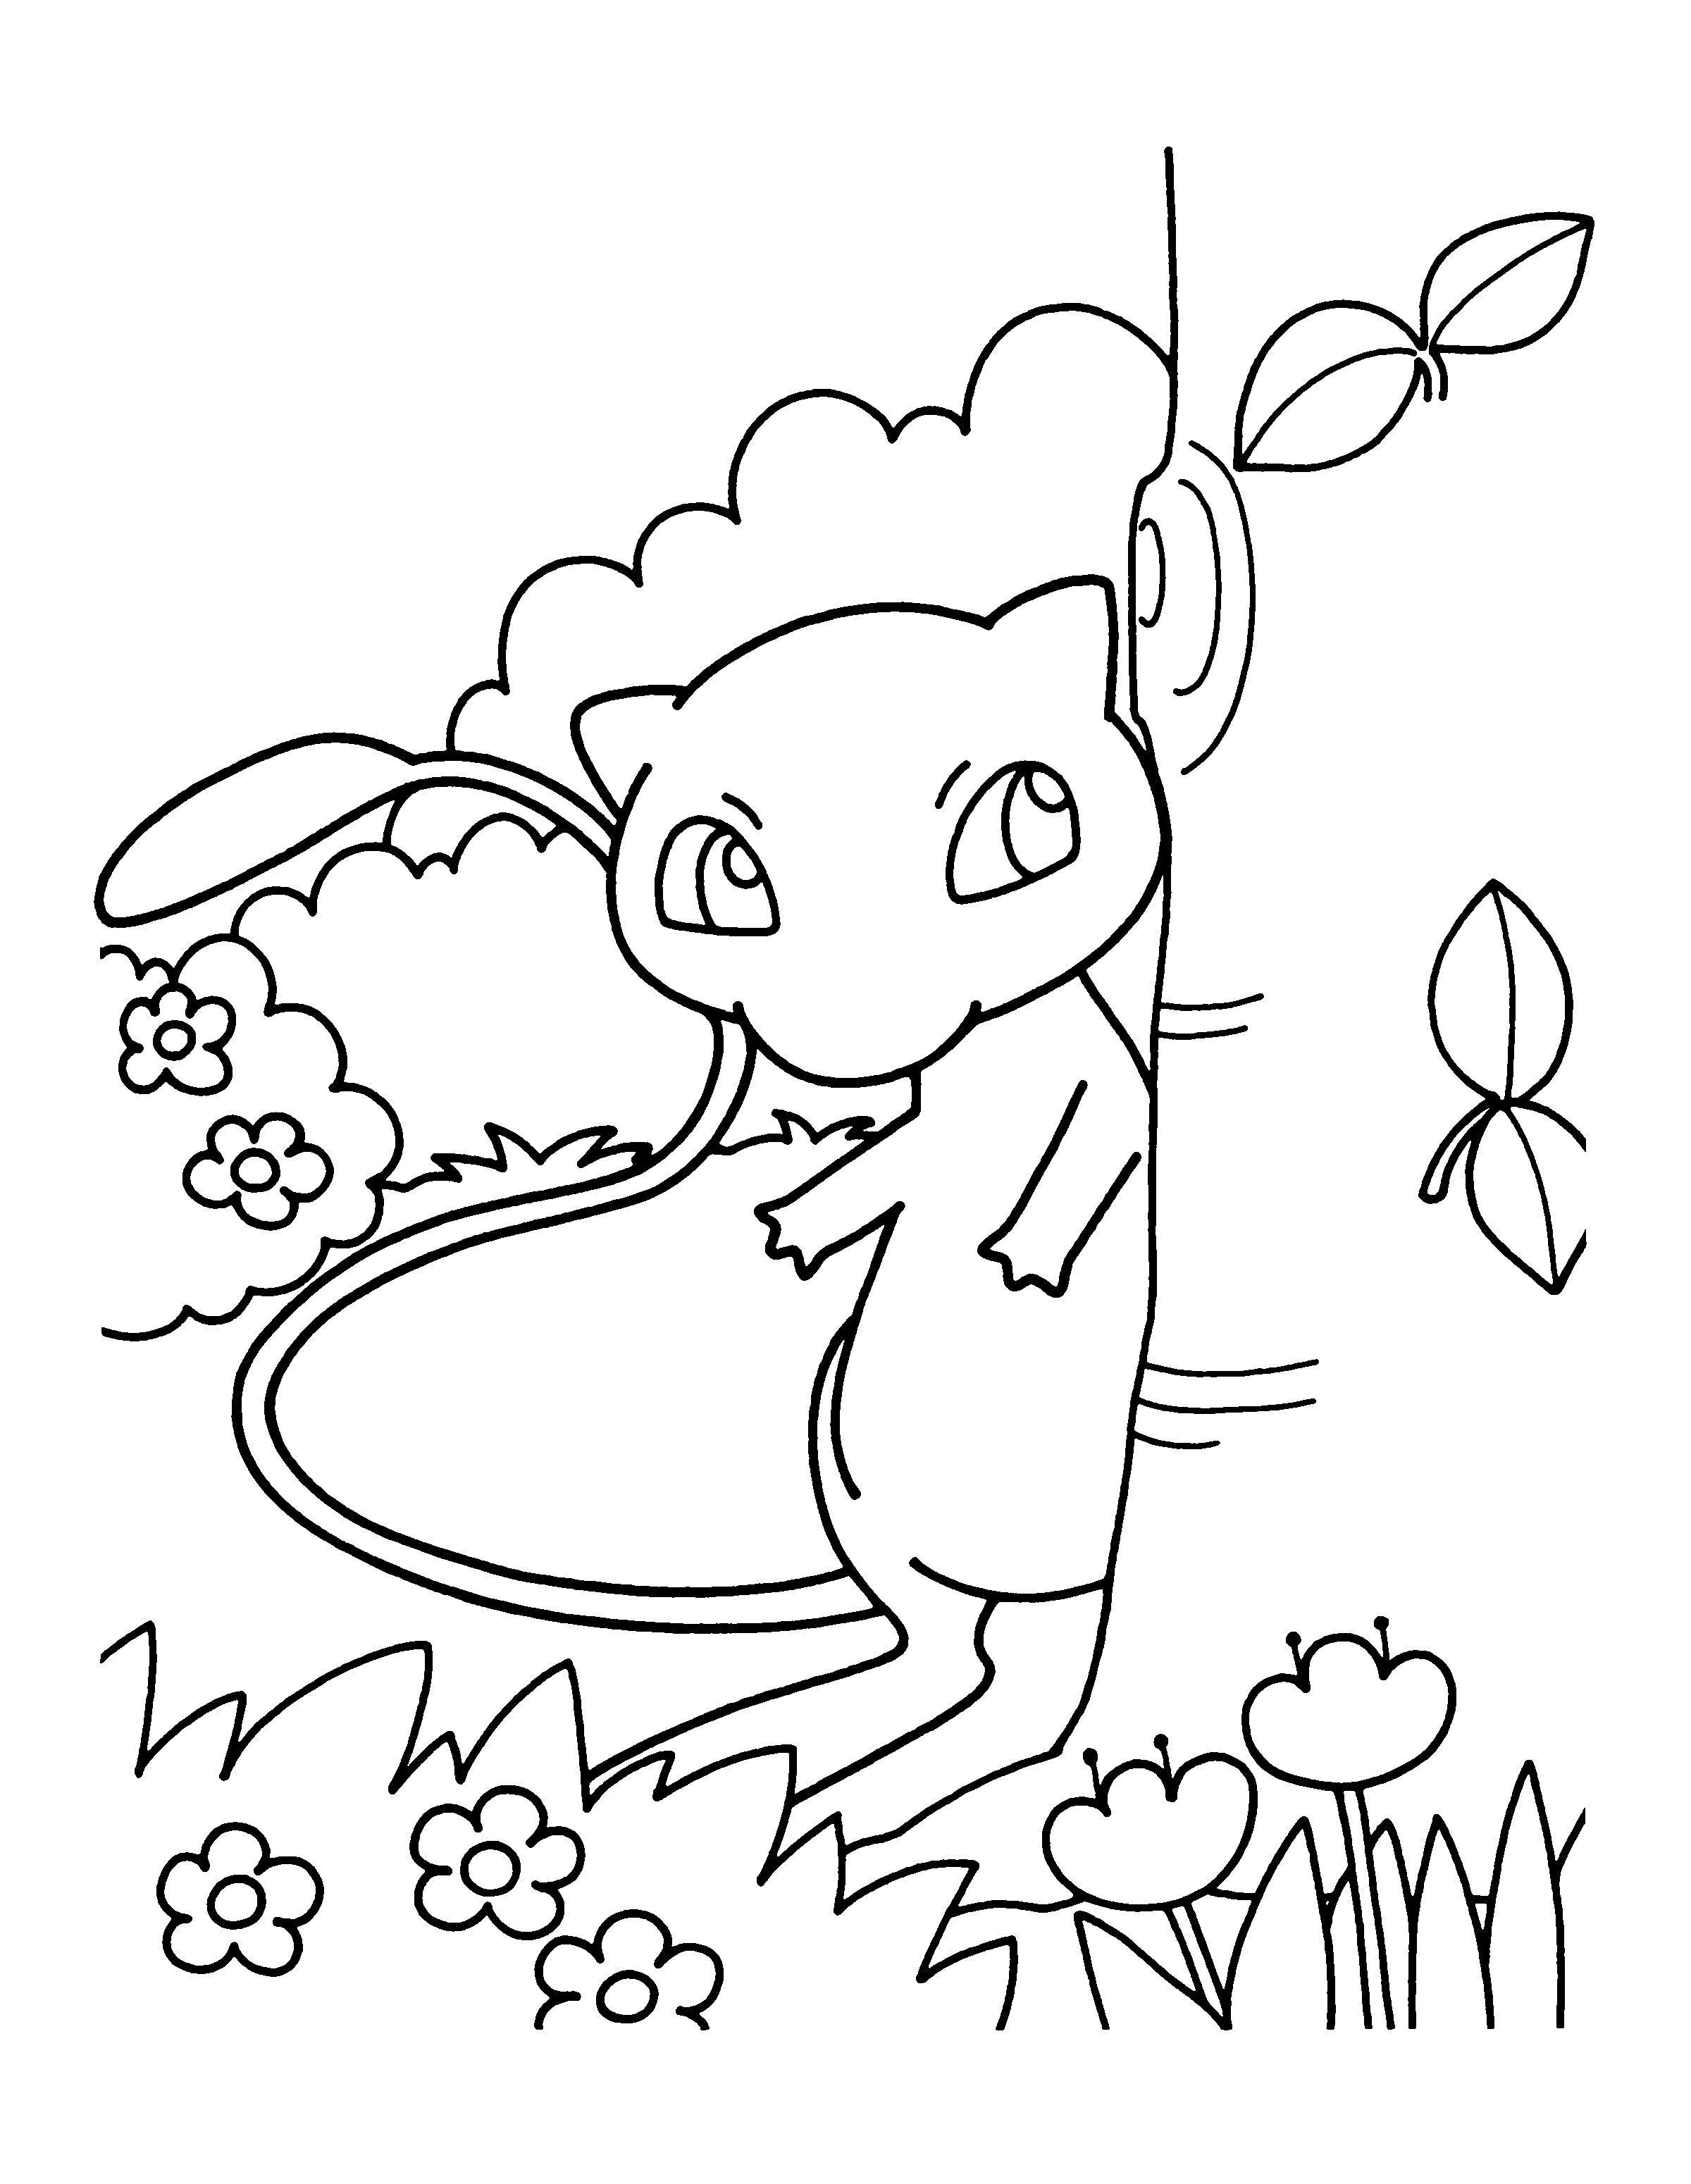  Pokemon Coloring Pages | Coloring pages for kids | coloring pages for boys | #23